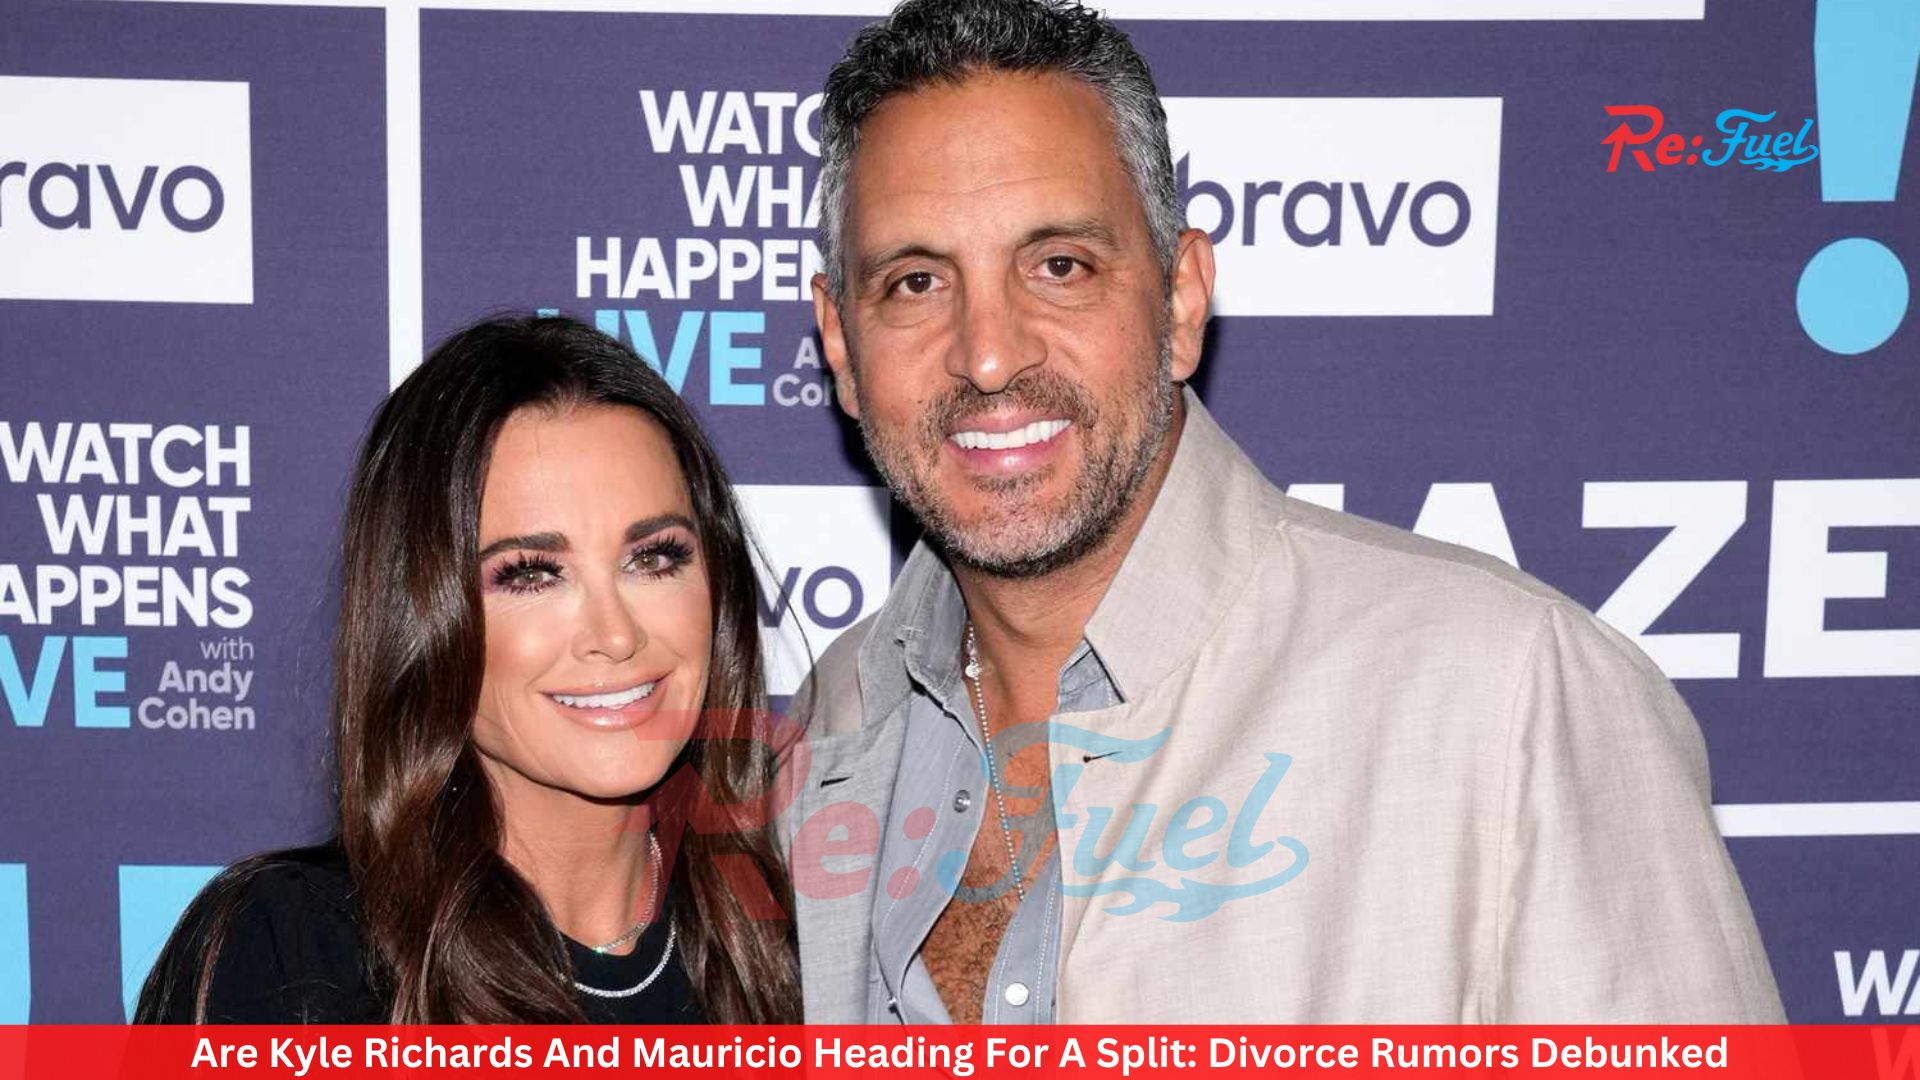 Are Kyle Richards And Mauricio Heading For A Split: Divorce Rumors Debunked